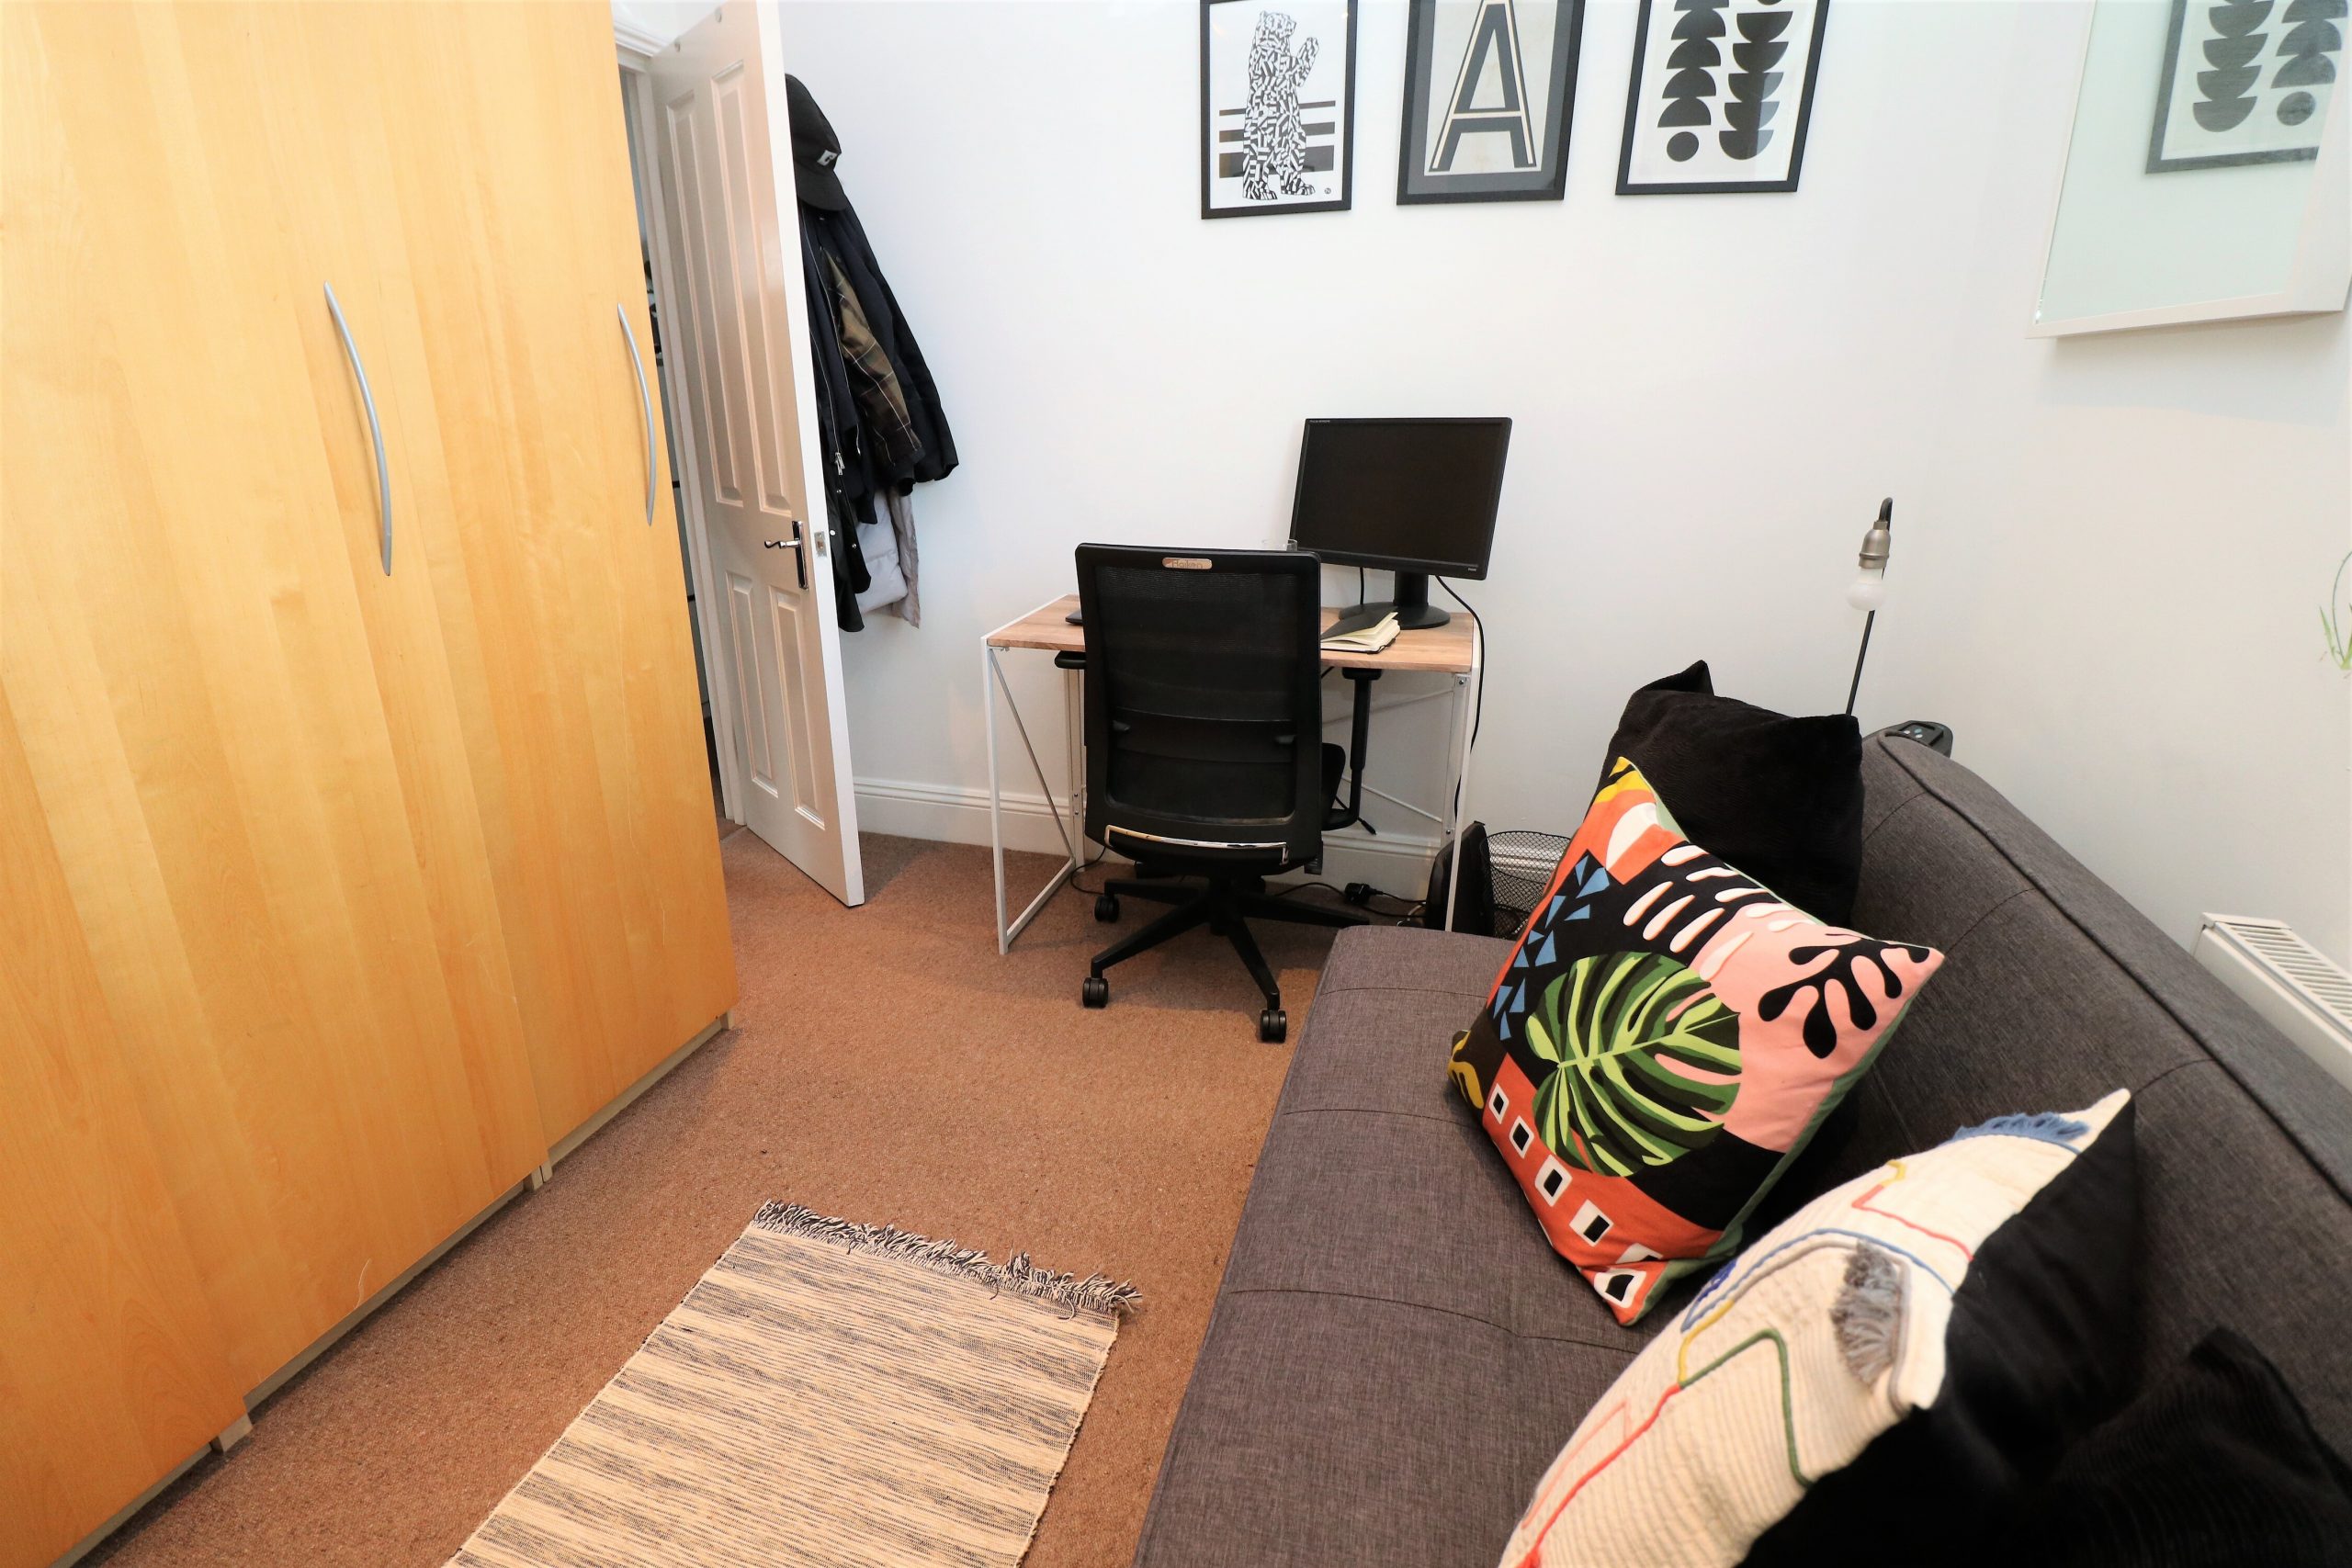 Split level two-double bedroom flat present in excellent condition in Archway, N19